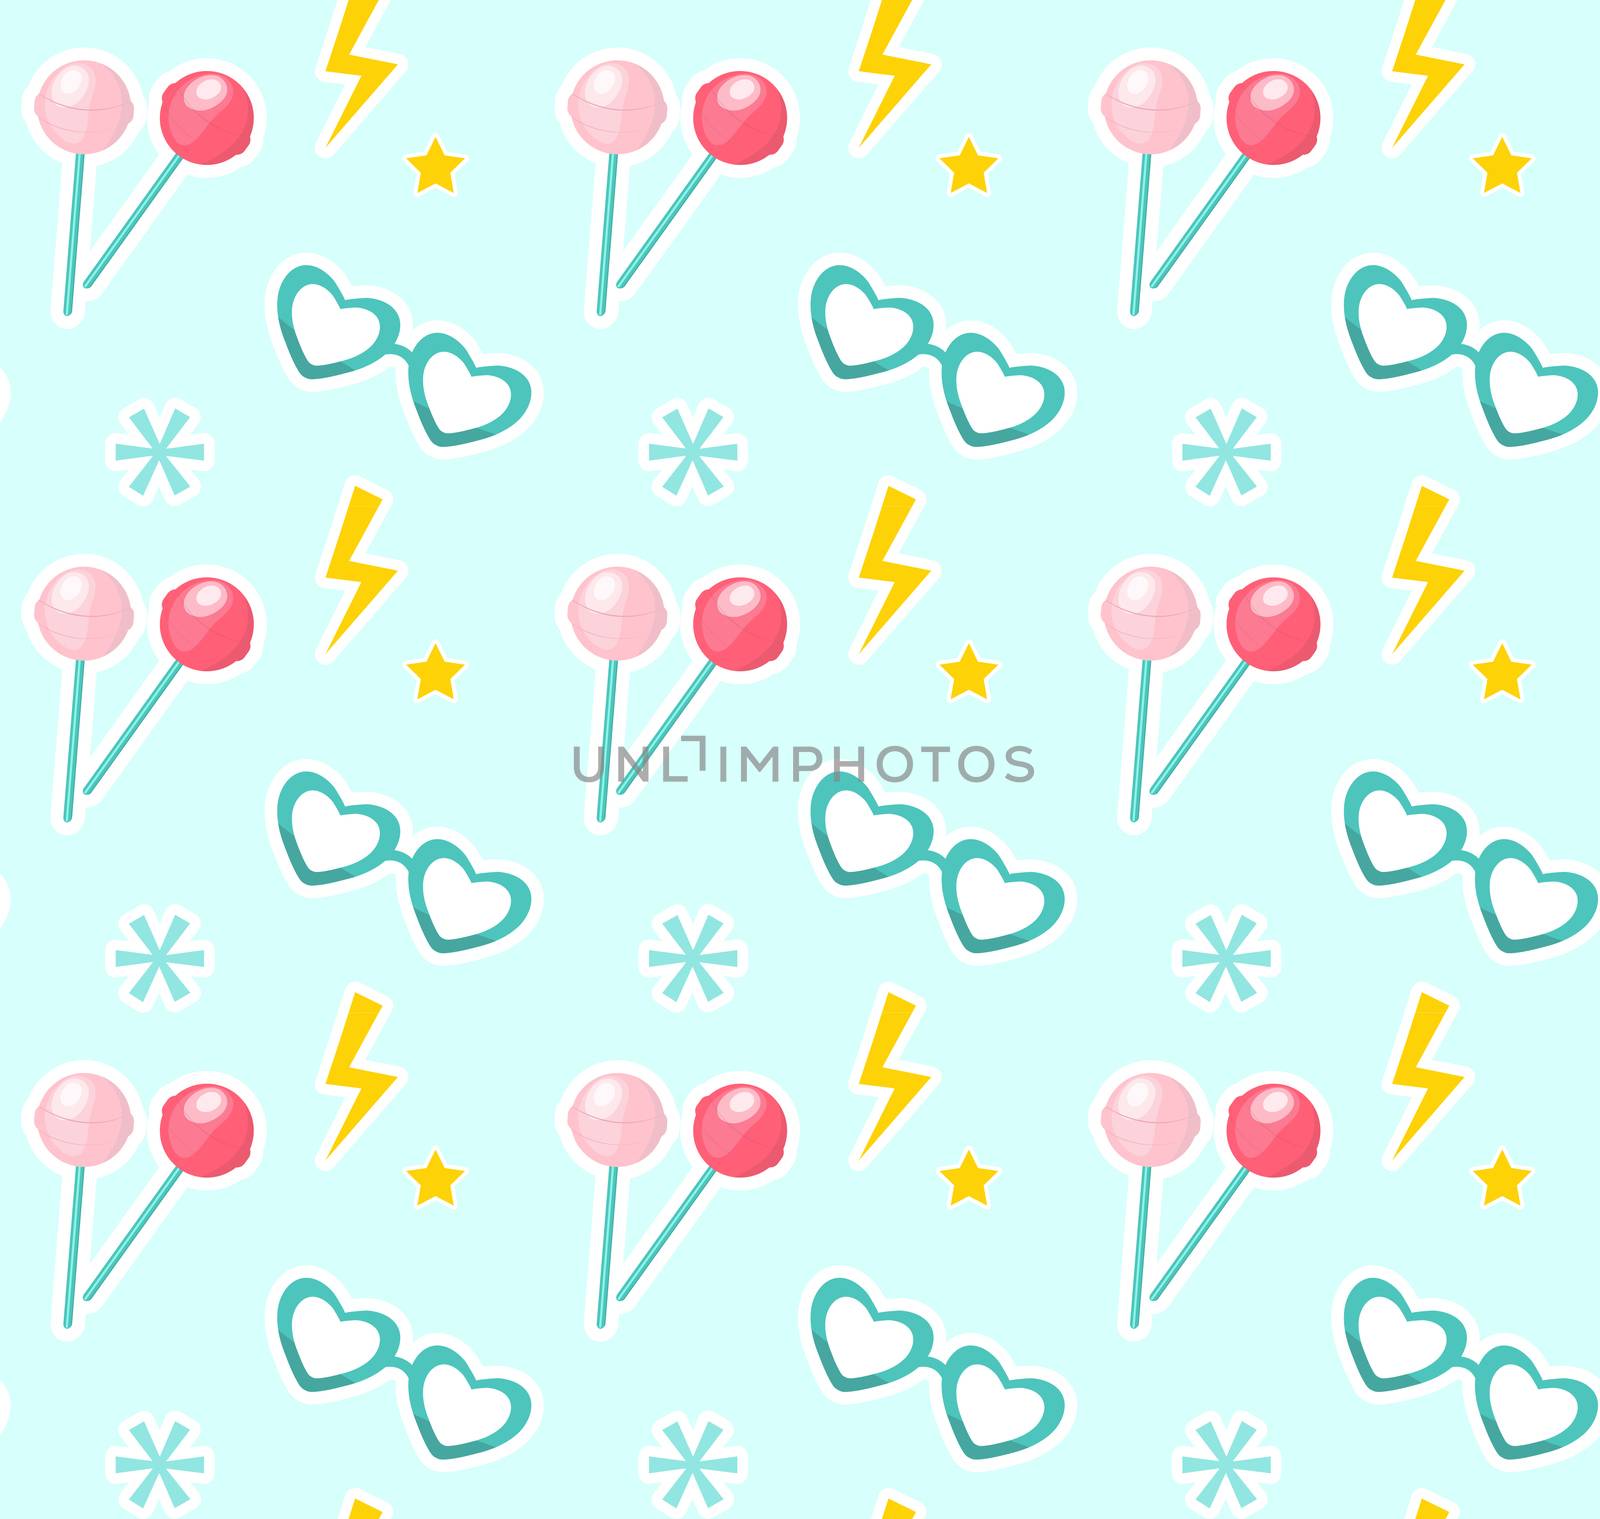 Candy on sticks, glasses in the shape of heart seamless pattern. Fashionable modern endless background, repeating texture. illustration